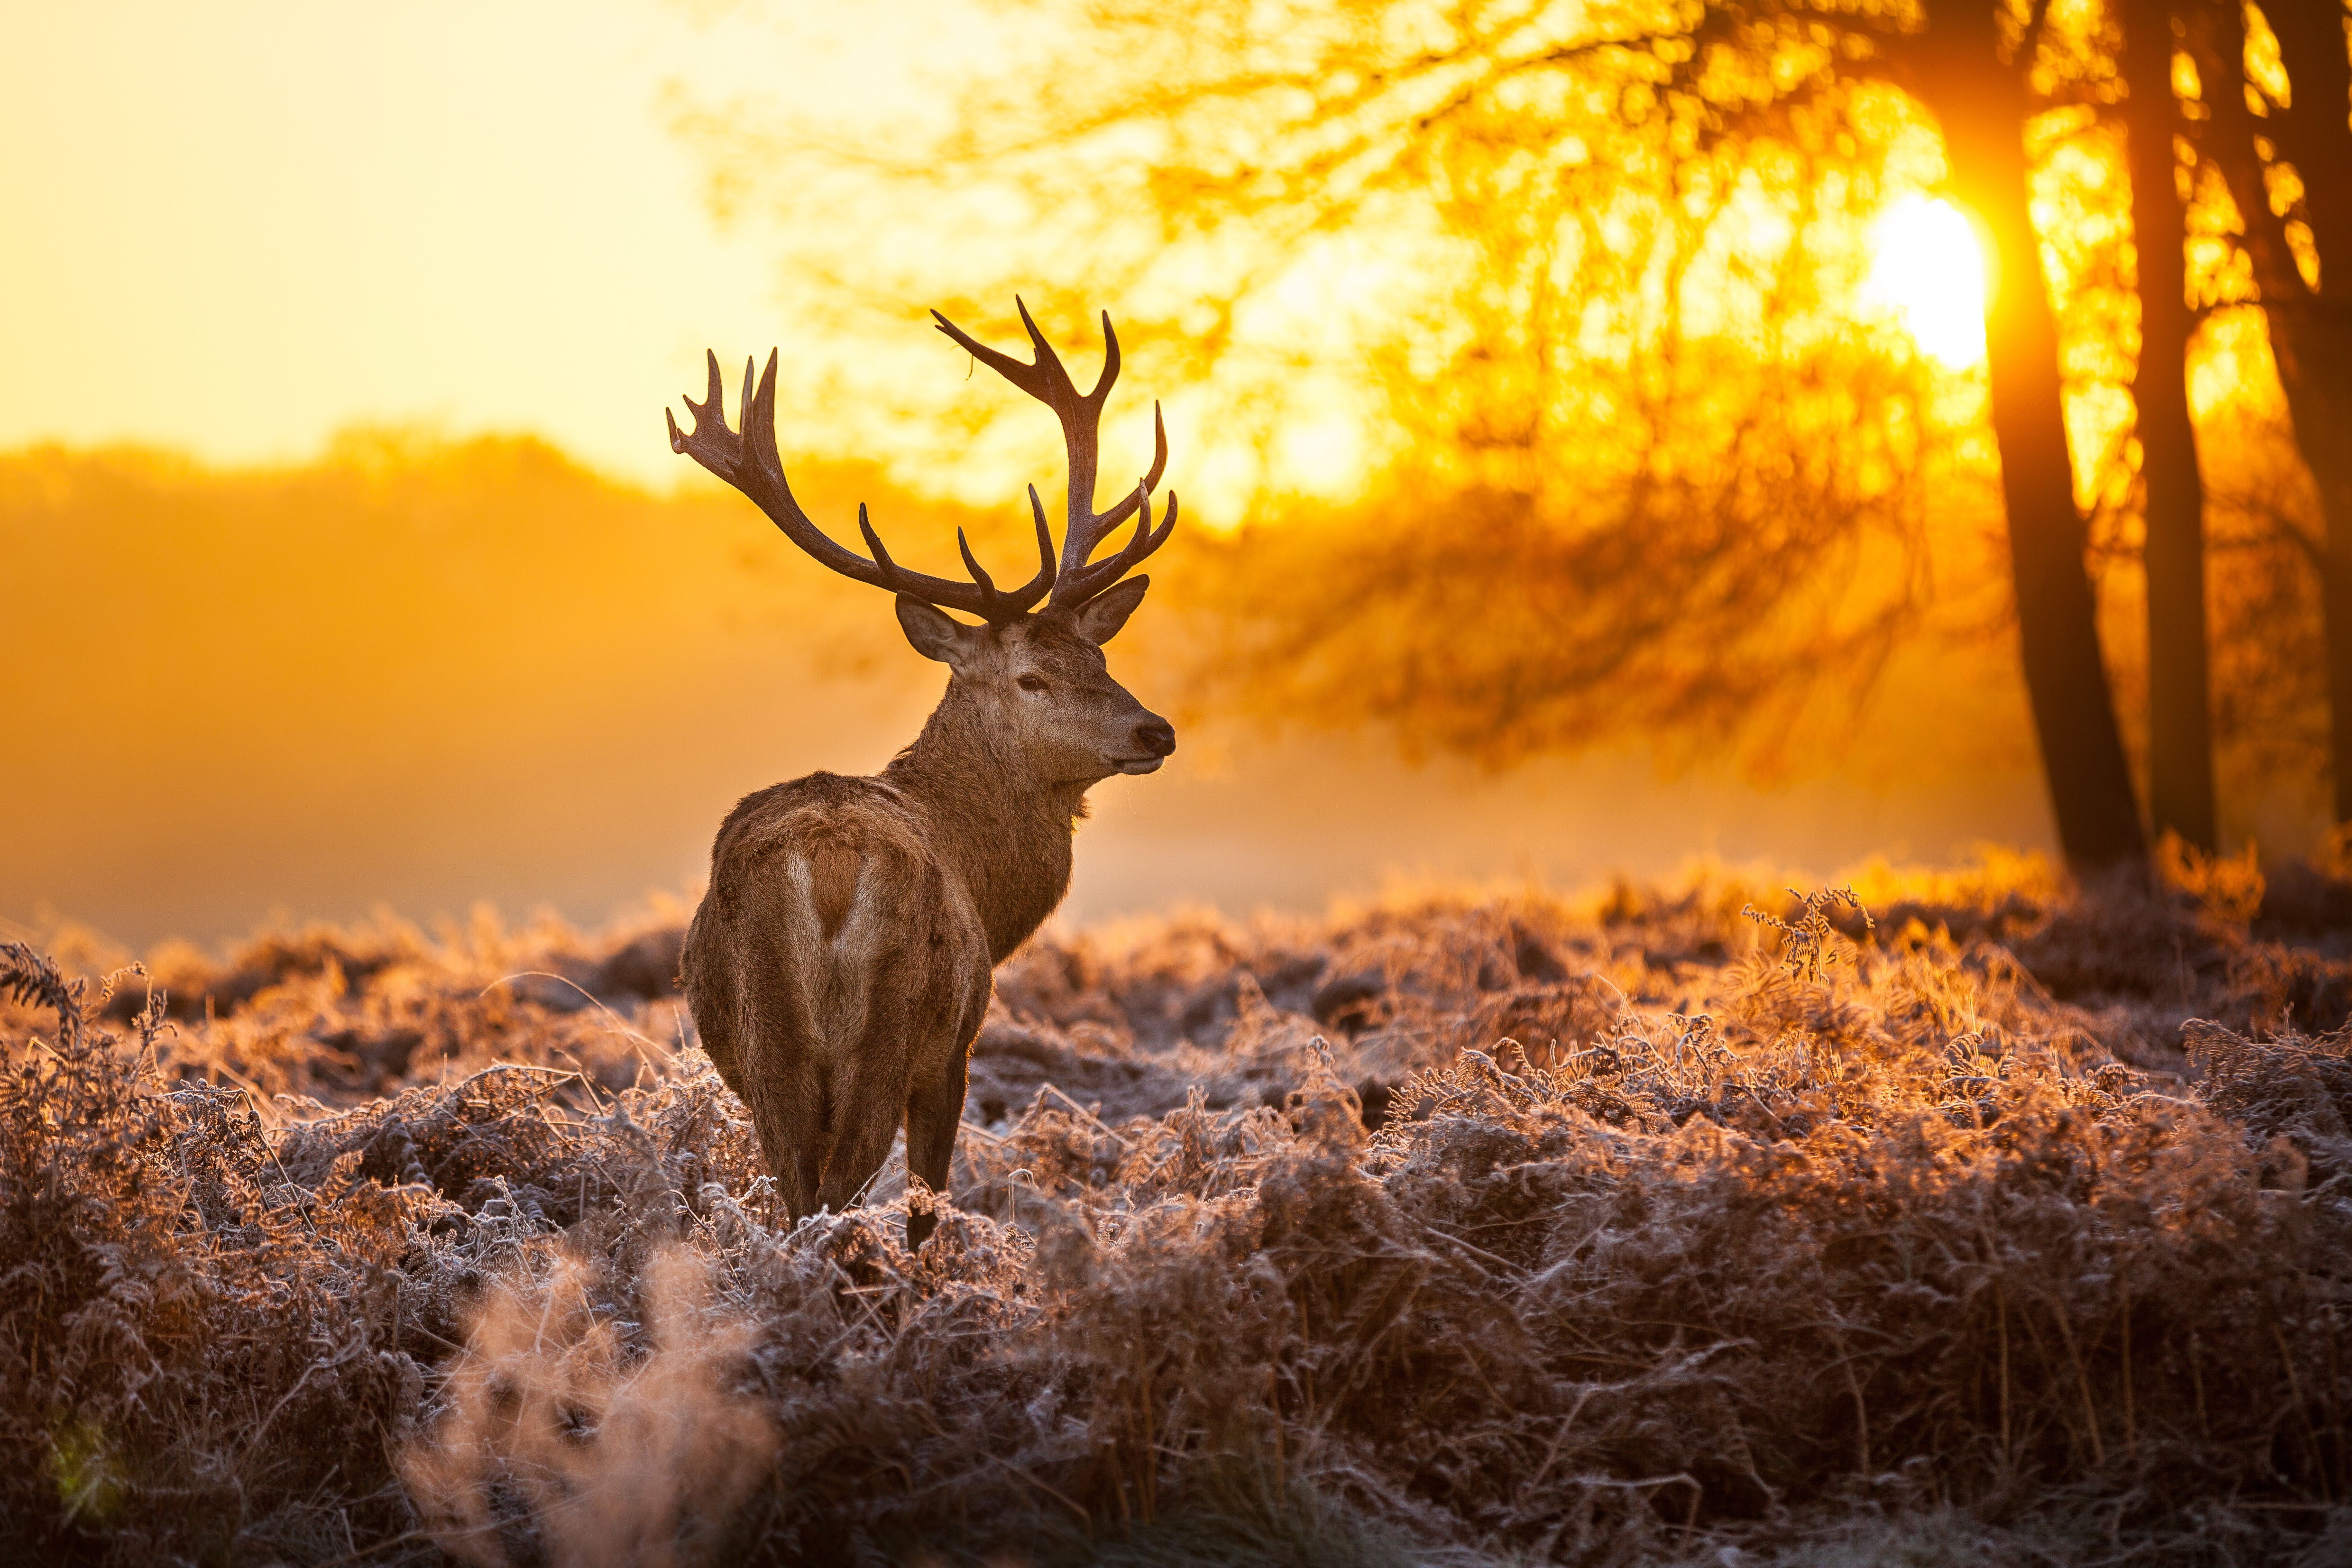 Deer s for desktop download free deer pictures and backgrounds for pc